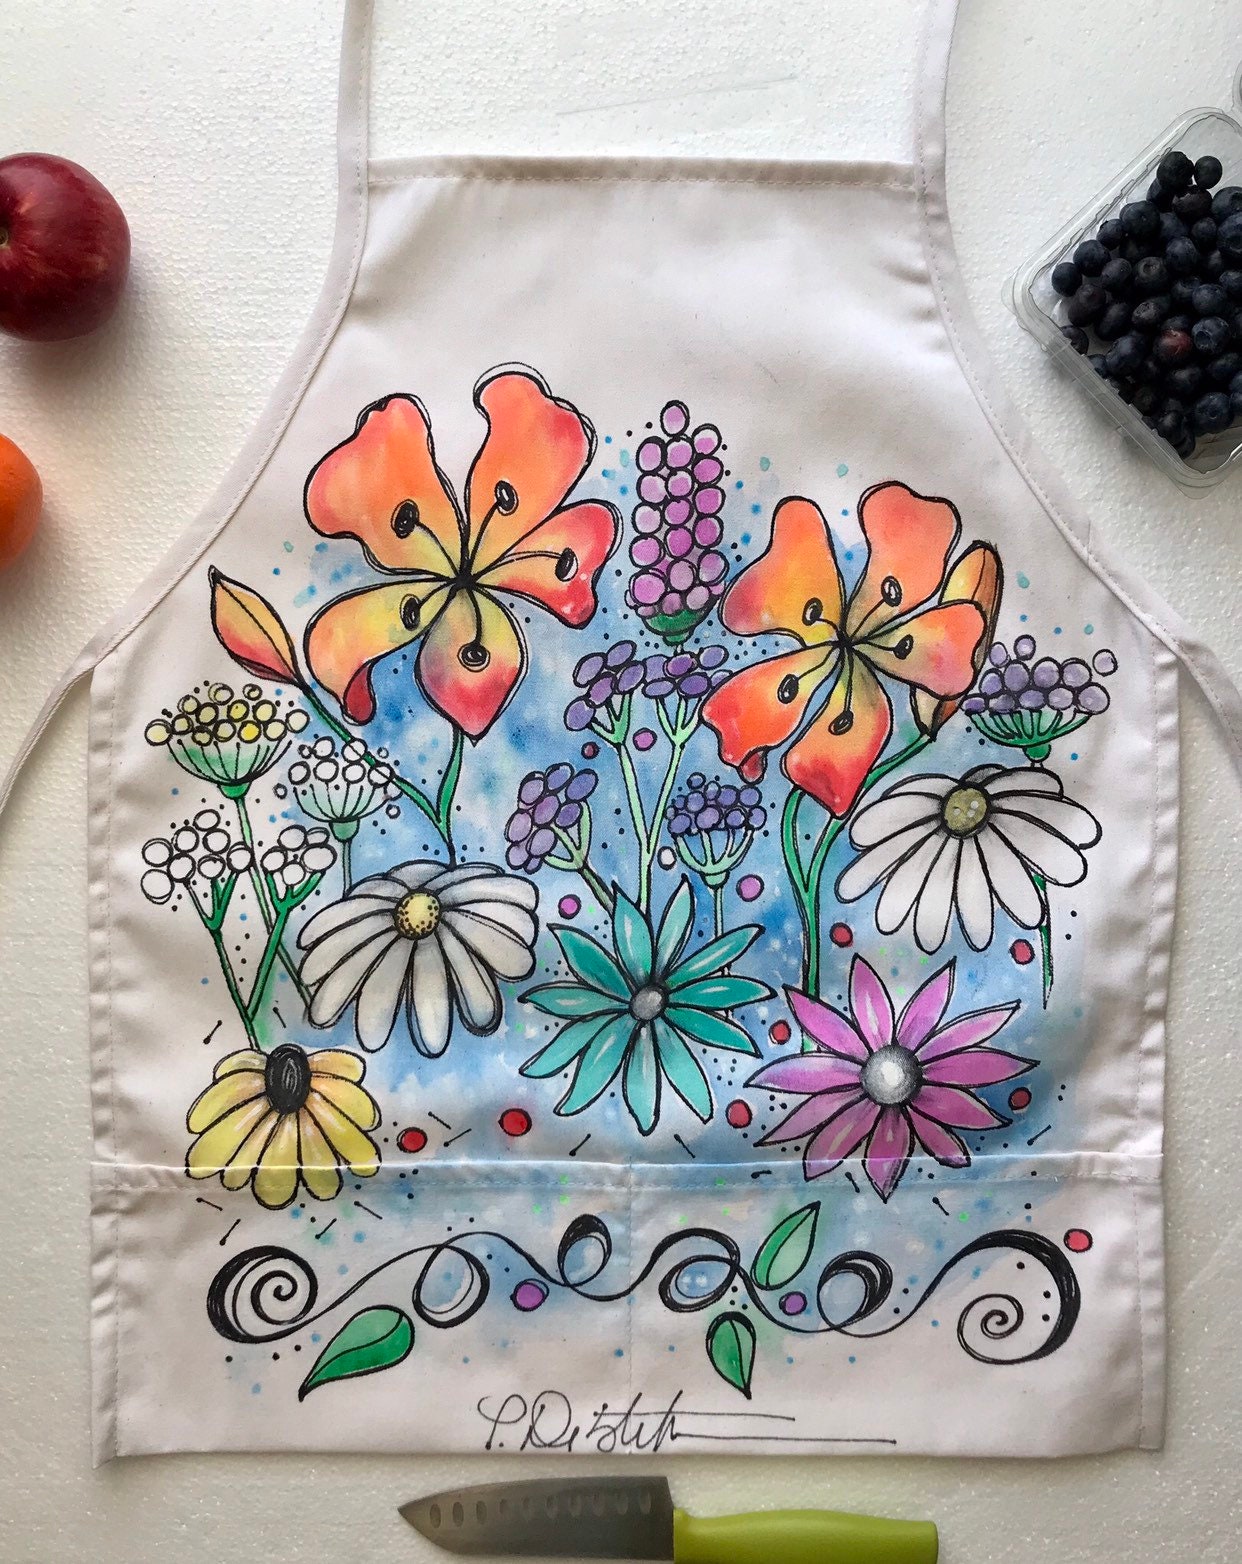 Art Therapist Embroidered Apron Artist Apron, Art Gifts, Creative Gift, Art  Smock, Artist Gifts, Holiday Gifts 